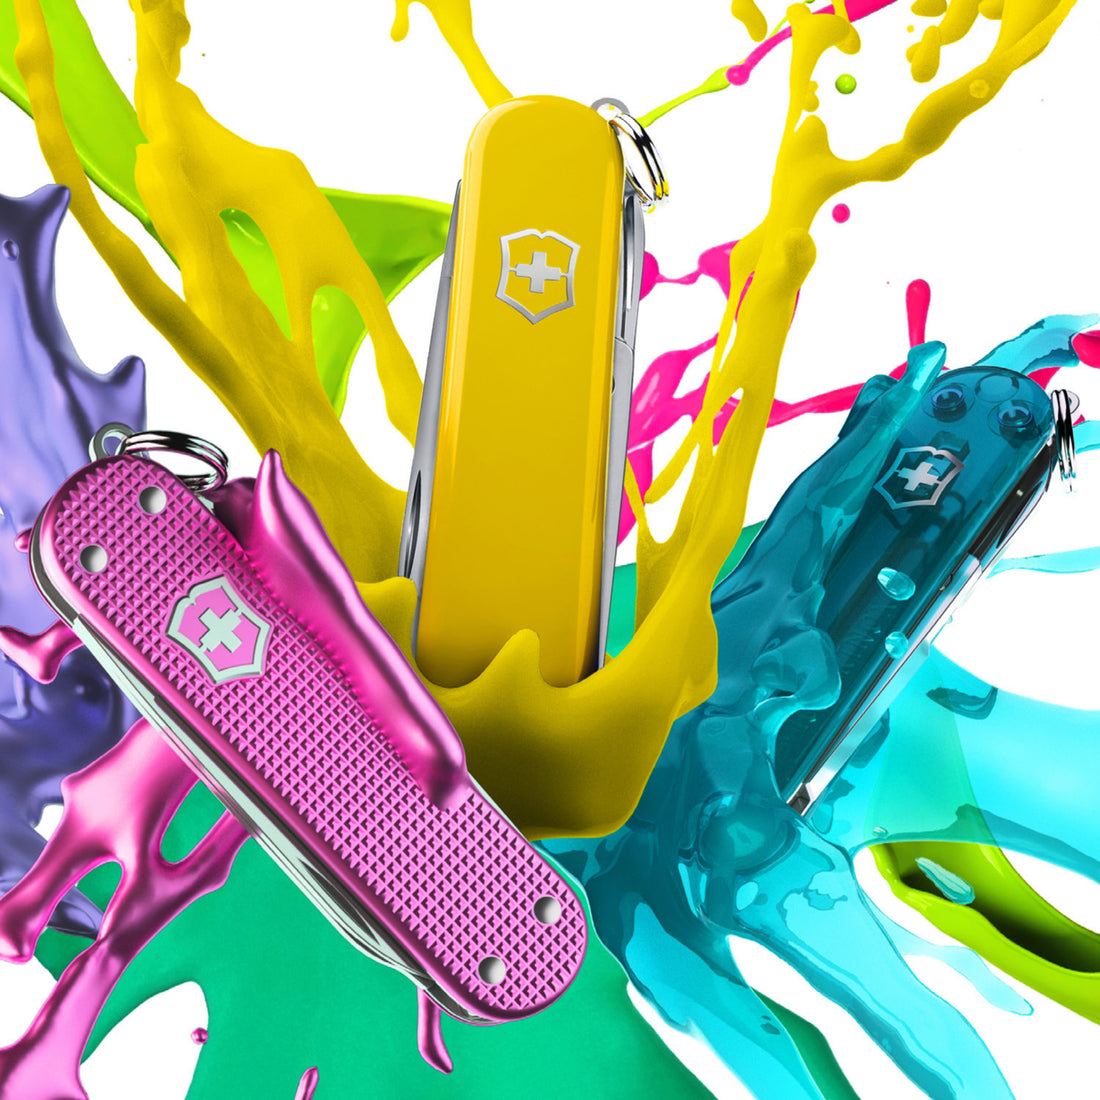 New! Swiss Army Classic SD Colors Collection by Victorinox at Swiss Knife Shop